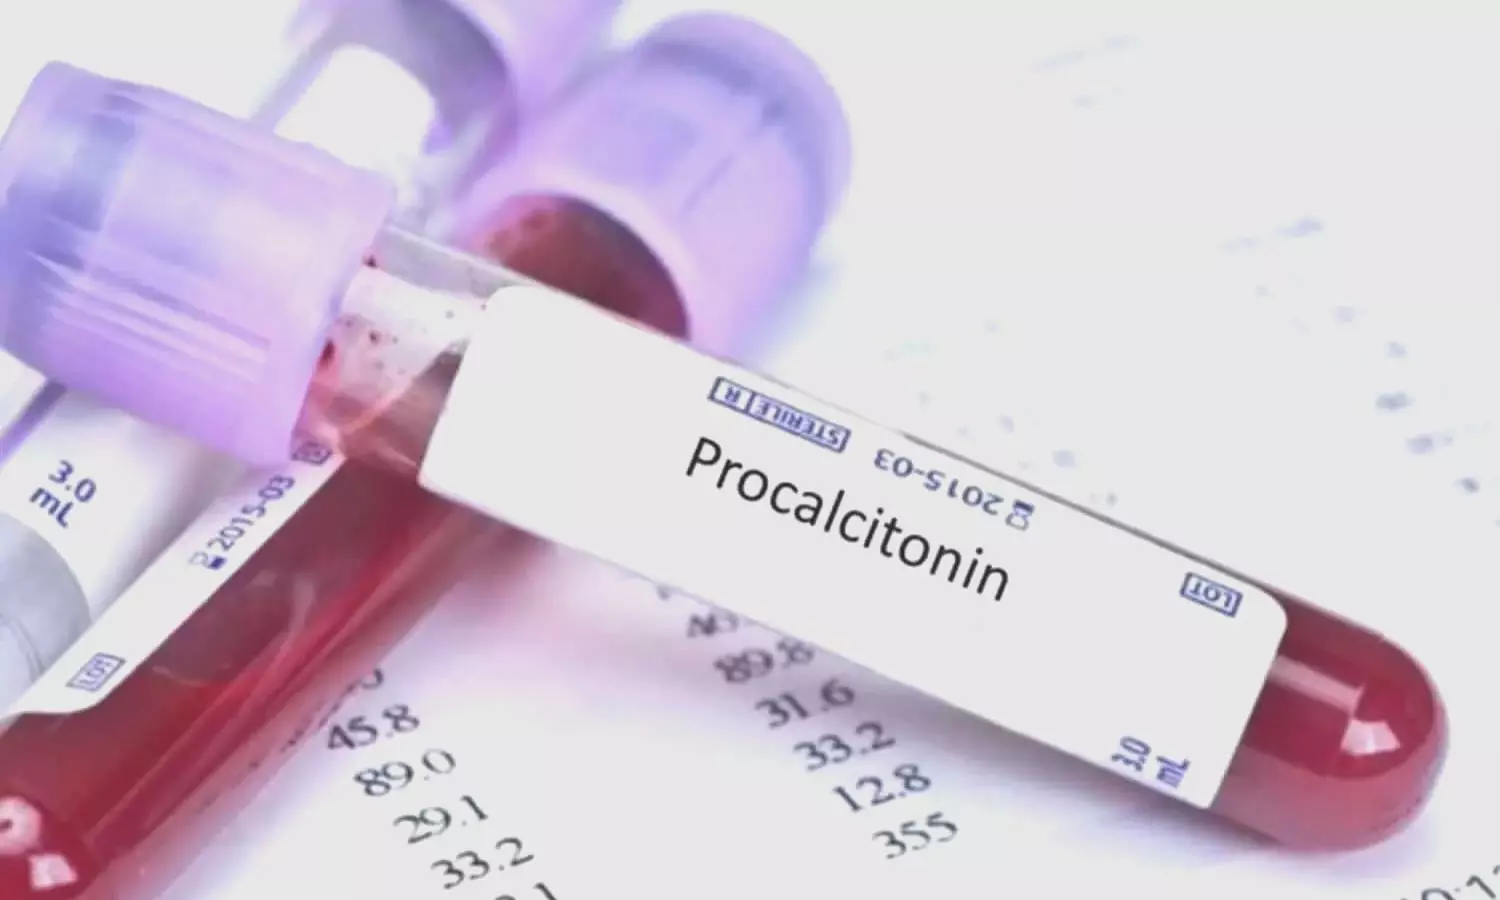 Use of procalcitonin for rational use of antibiotics: ISCCM Guidelines